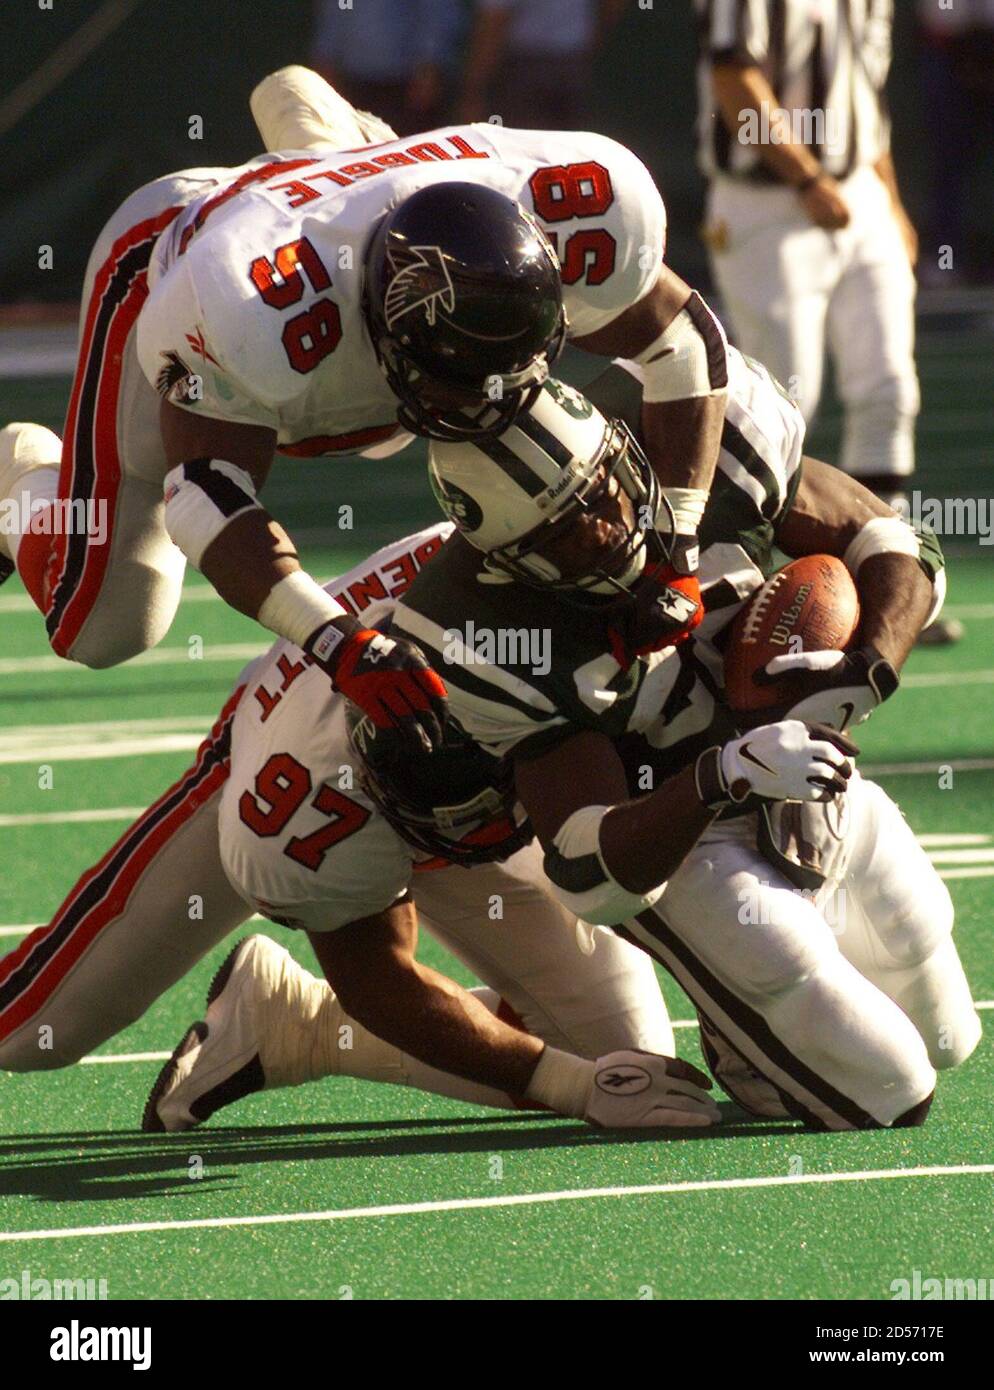 New York Jets' running back Curtis Martin (R) is tackled after gaining a  first down by Atlanta Falcons' defenders Cornelius Bennett (L) and Jessie  Tuggle (top) during the first quarter of their